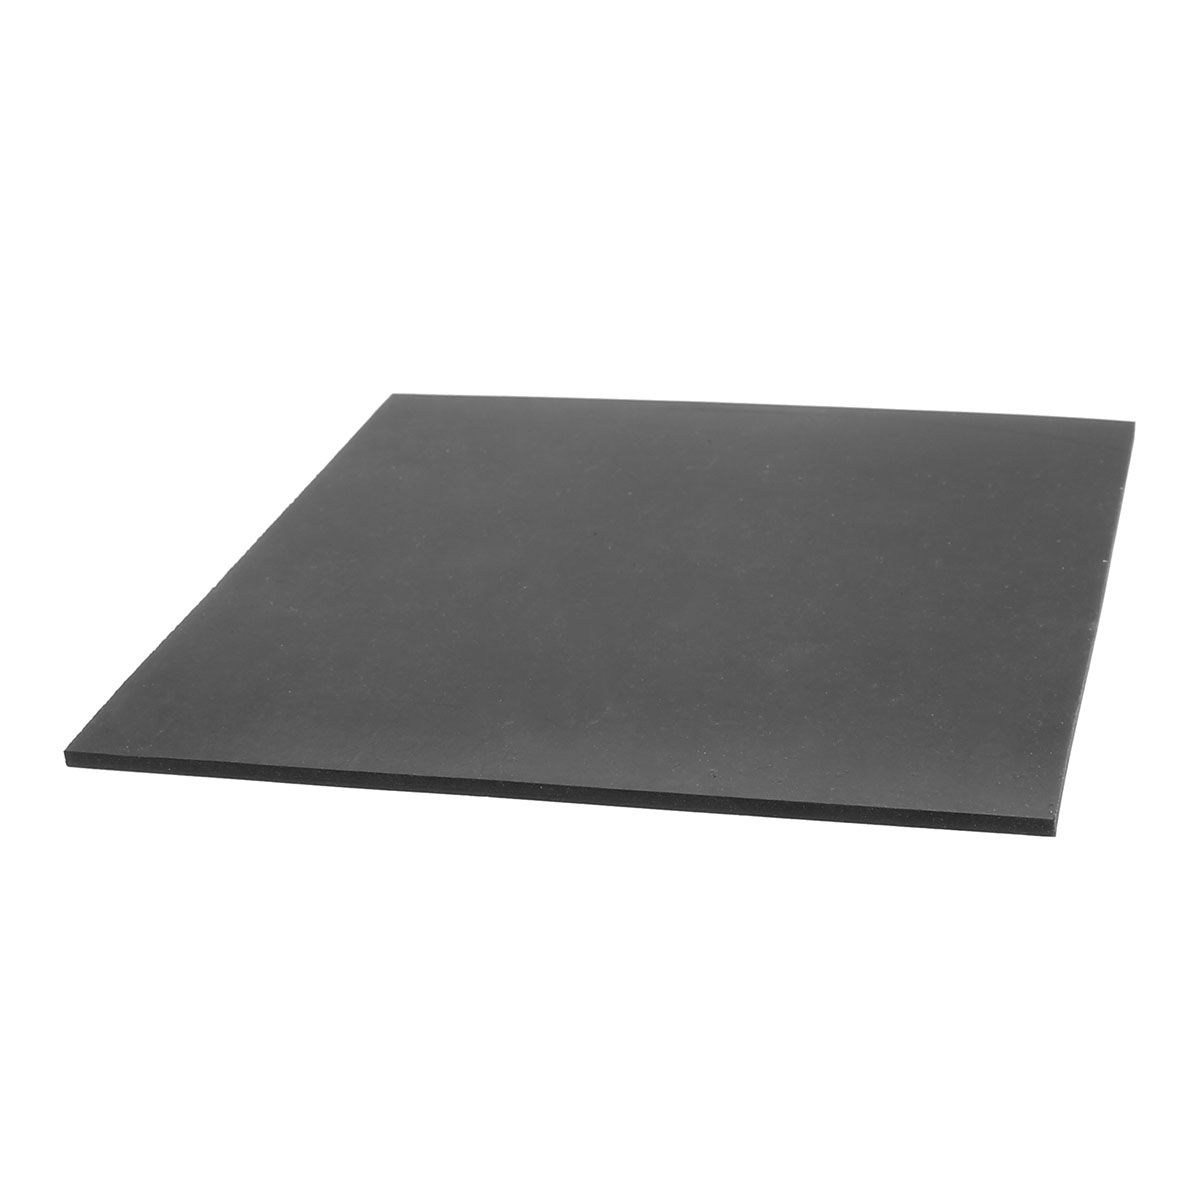 3times152times152mm-Rubber-Sheet-Resistance-High-Temperature-Rubber-Board-1117812-2